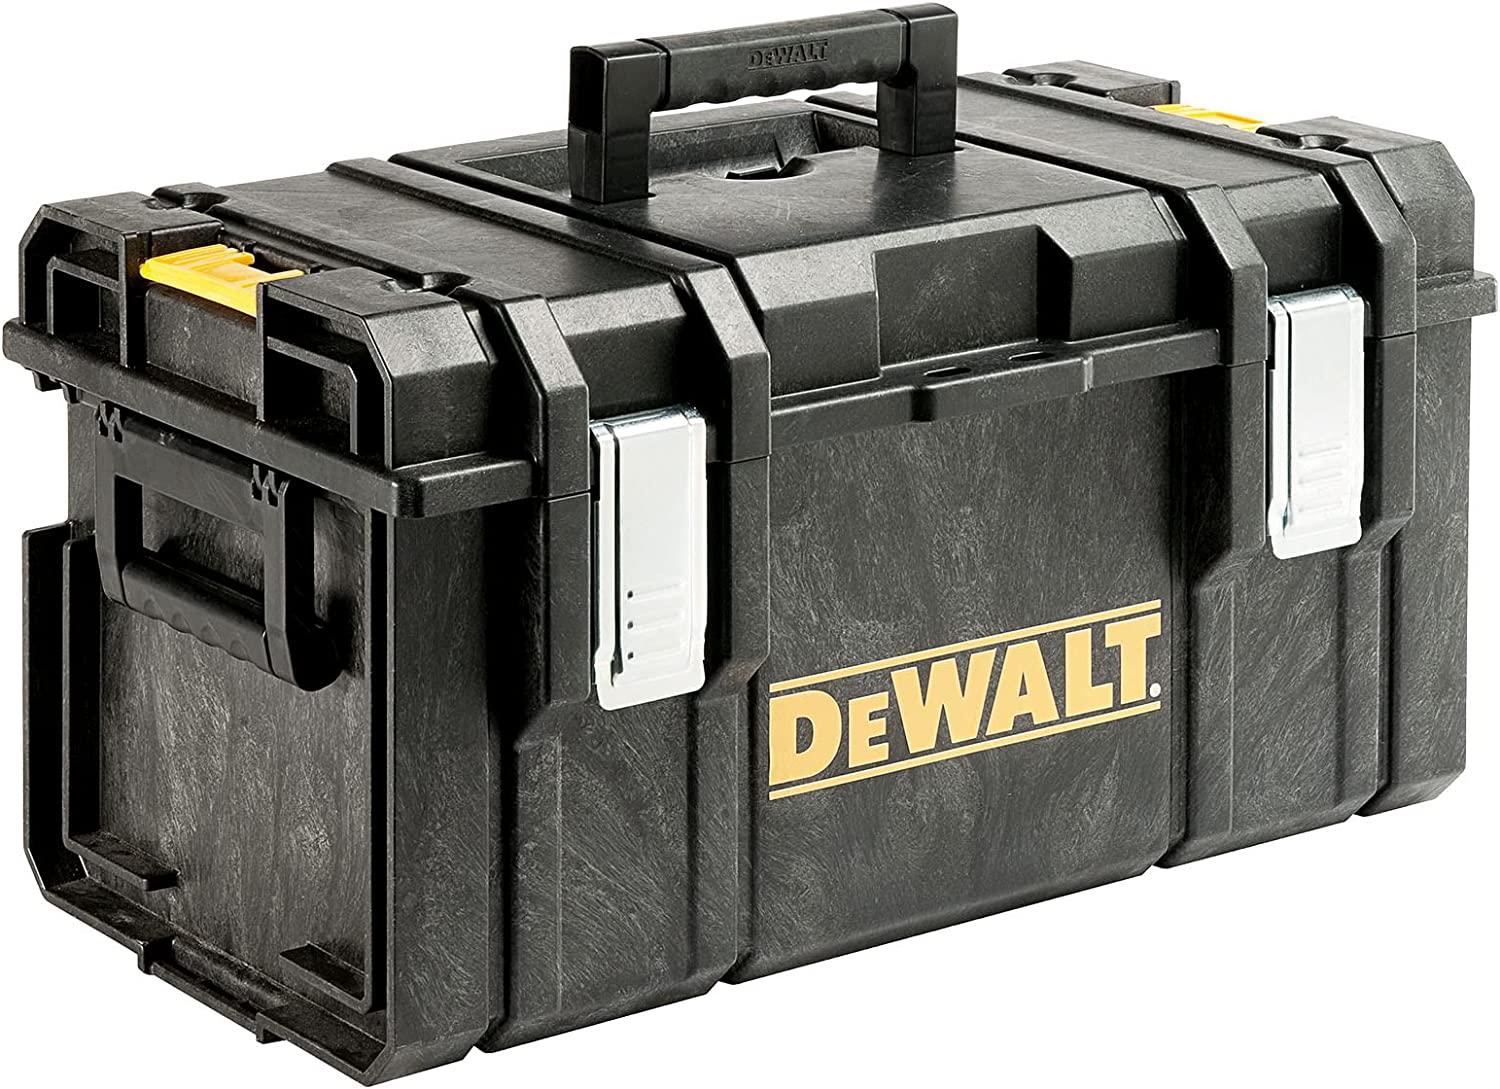 DeWALT Large Tough System Tool Box for $37.11 Shipped